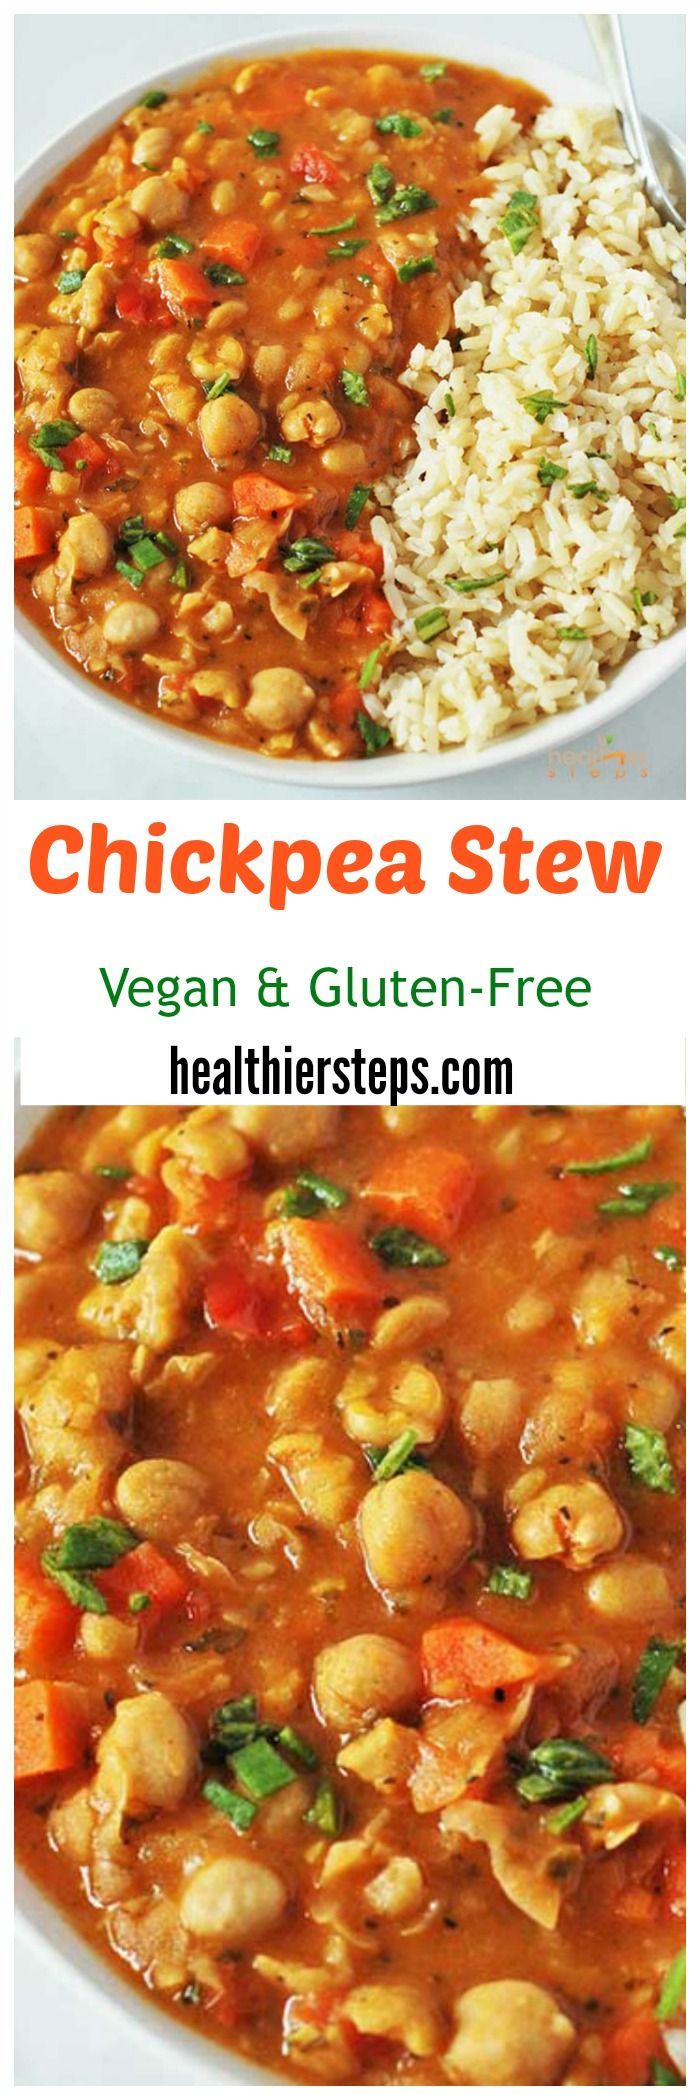 This Chickpea stew Gluten-Free Vegan is a hearty and comforting stew. It is simple to make and delicious! Chickpea is a low-fat